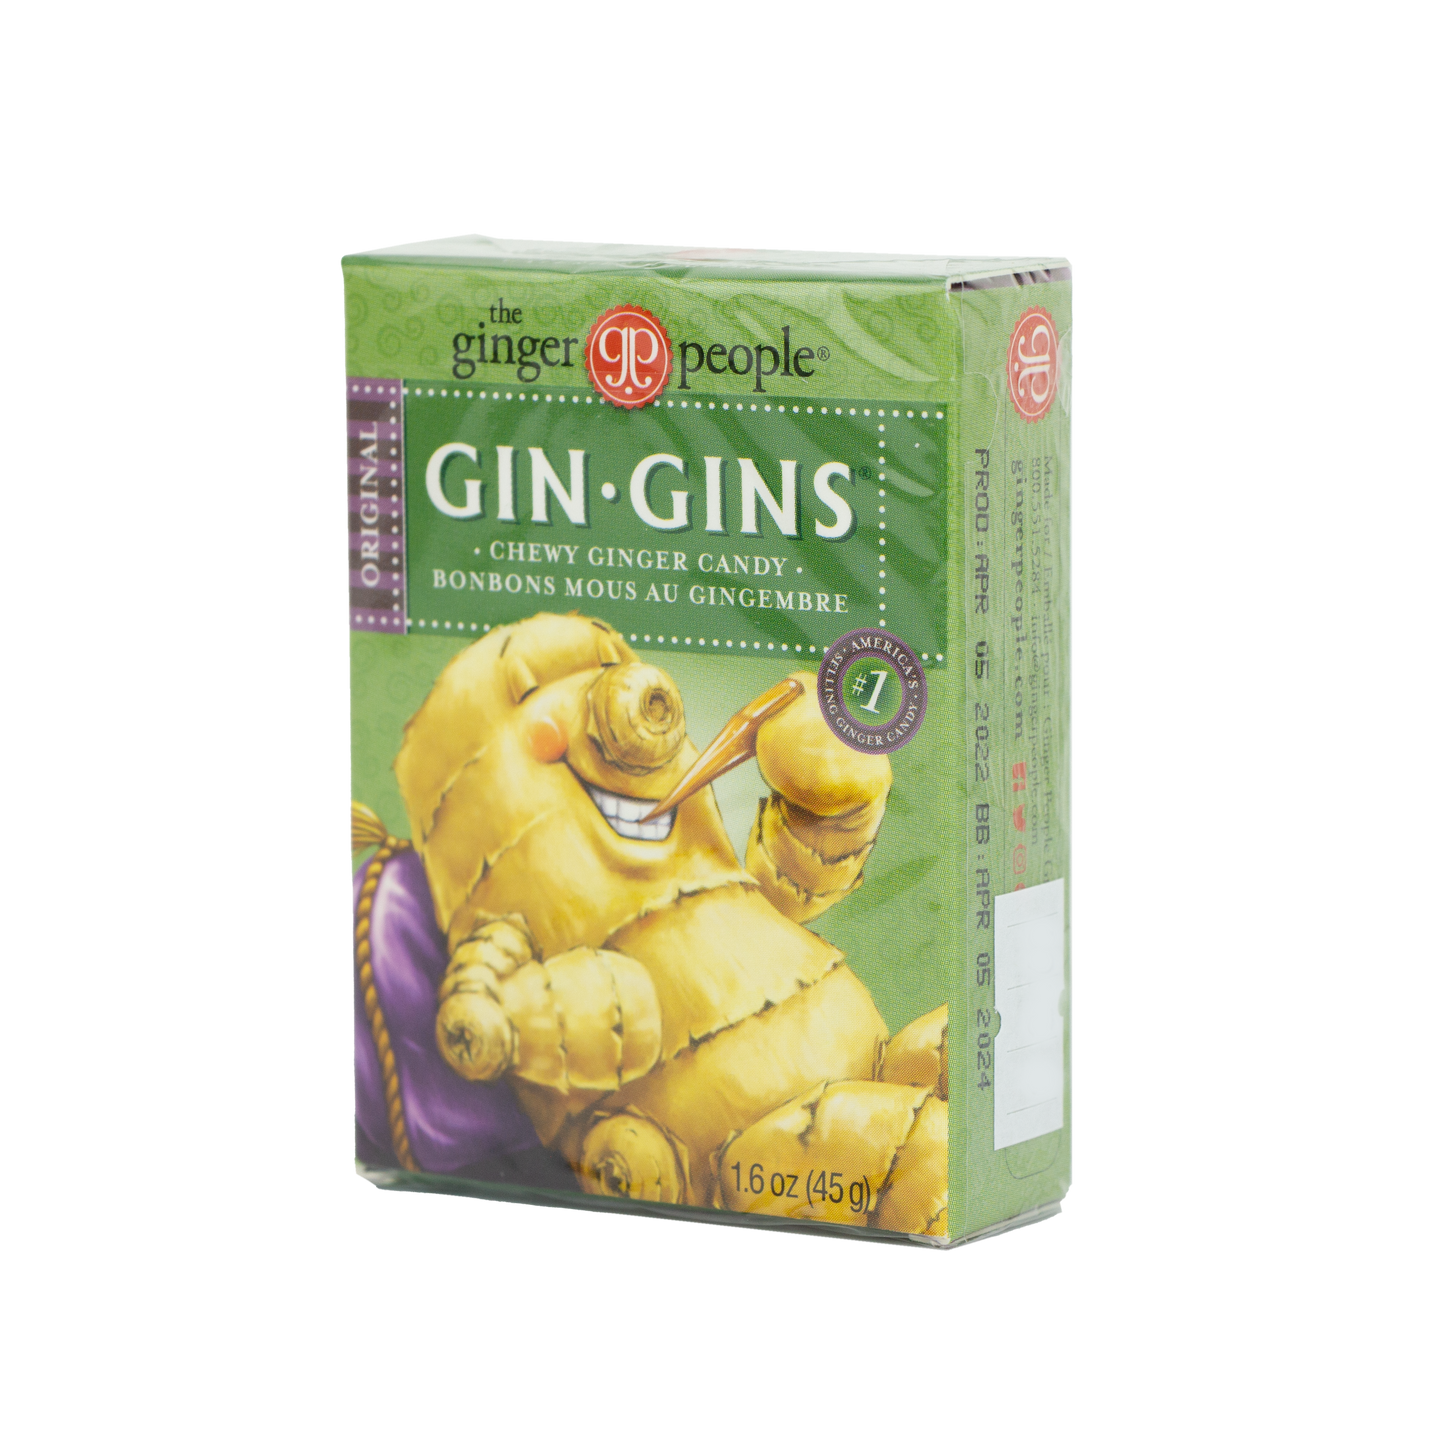 The Ginger People - Gin Gins Chewy Ginger Candy (1.6 oz)